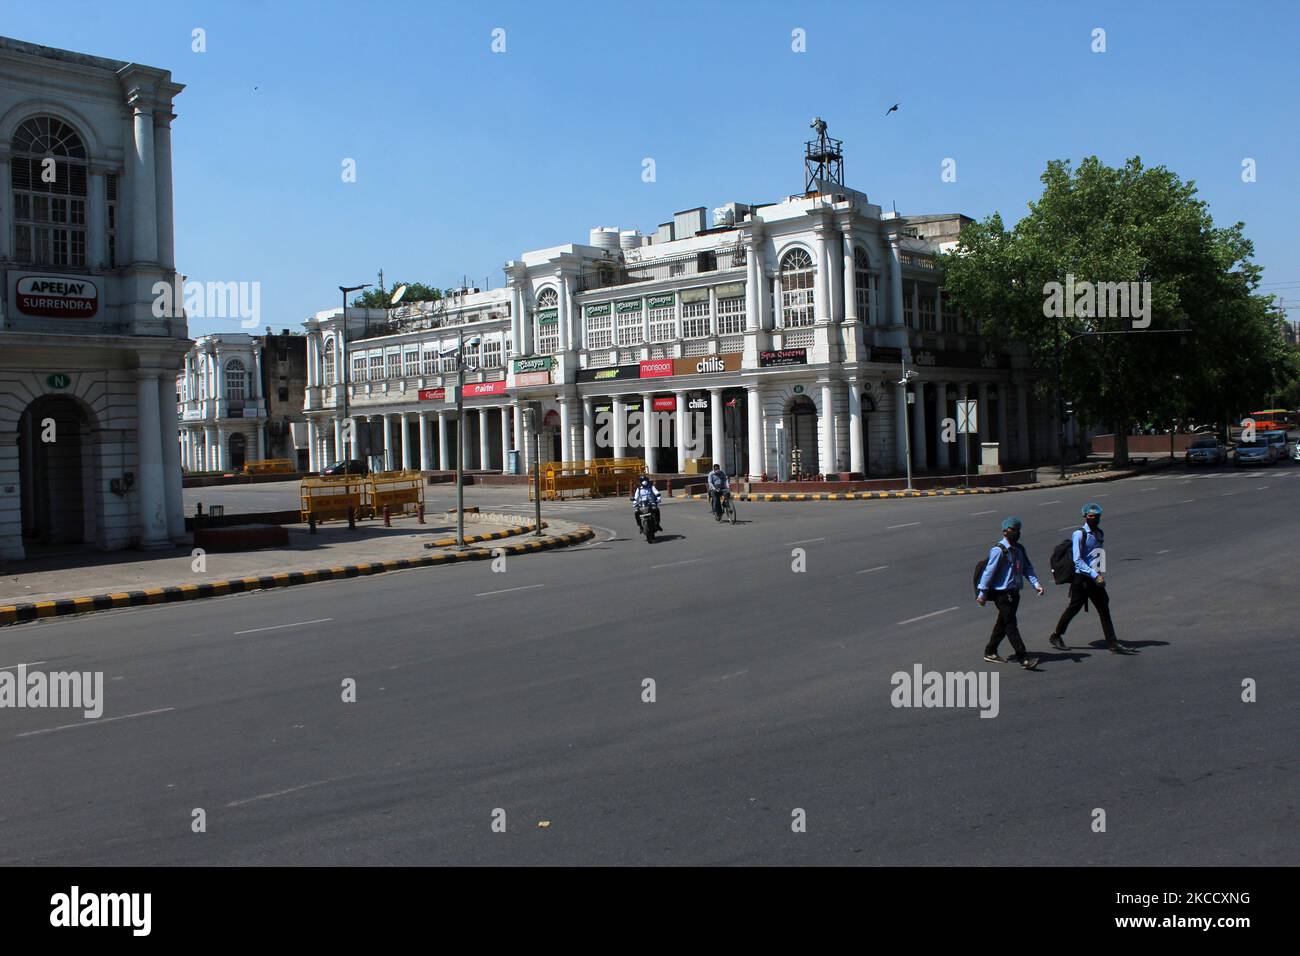 Men walk past a deserted street during a weekend lockdown at Connaught Place in New Delhi, India on April 17, 2021. India on Saturday reported 2,34,692 new Covid-19 cases and 1,341 deaths in the last 24 hours, according to data from the Union Health Ministry. (Photo by Mayank Makhija/NurPhoto) Stock Photo